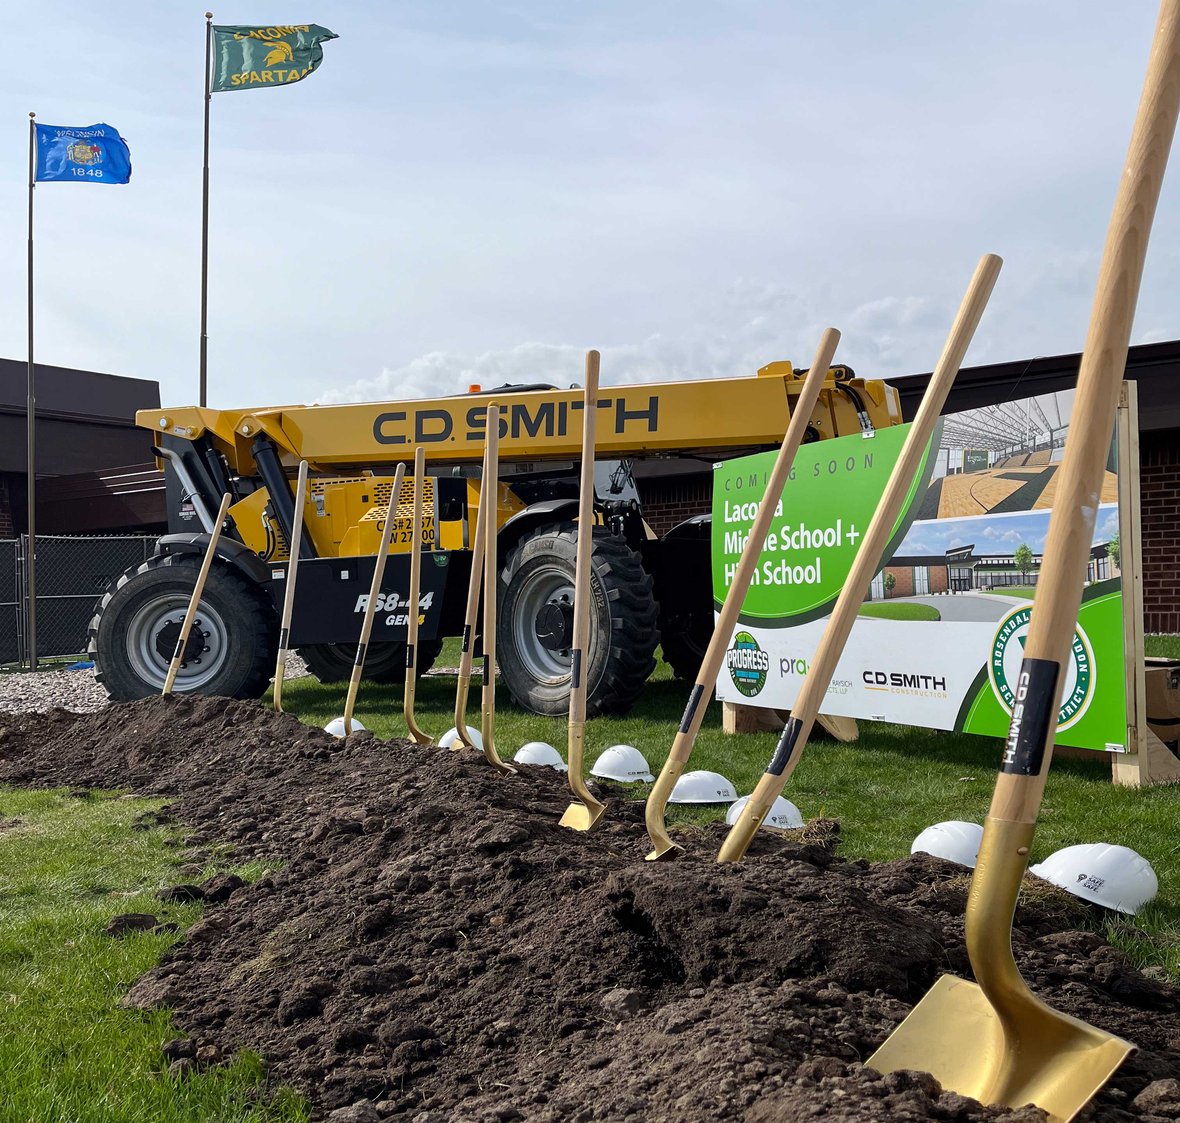 Shovels with project sign and CD Smith Construction equipment in front of Laconia High School for Rosendale Brandon School District groundbreaking ceremony